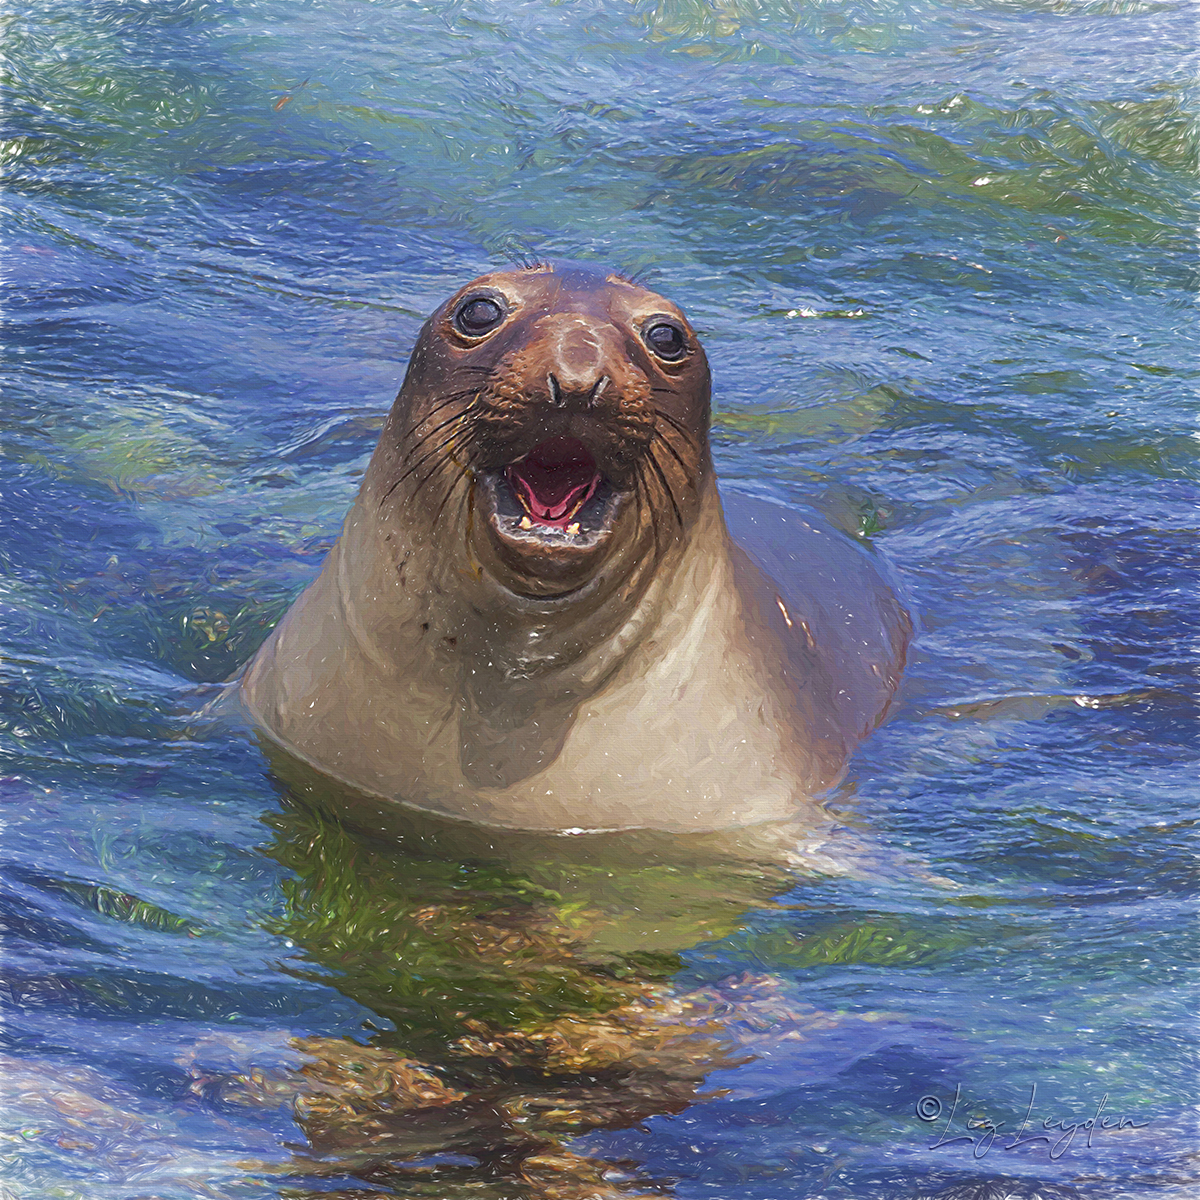 Northern Elephant Seal in water